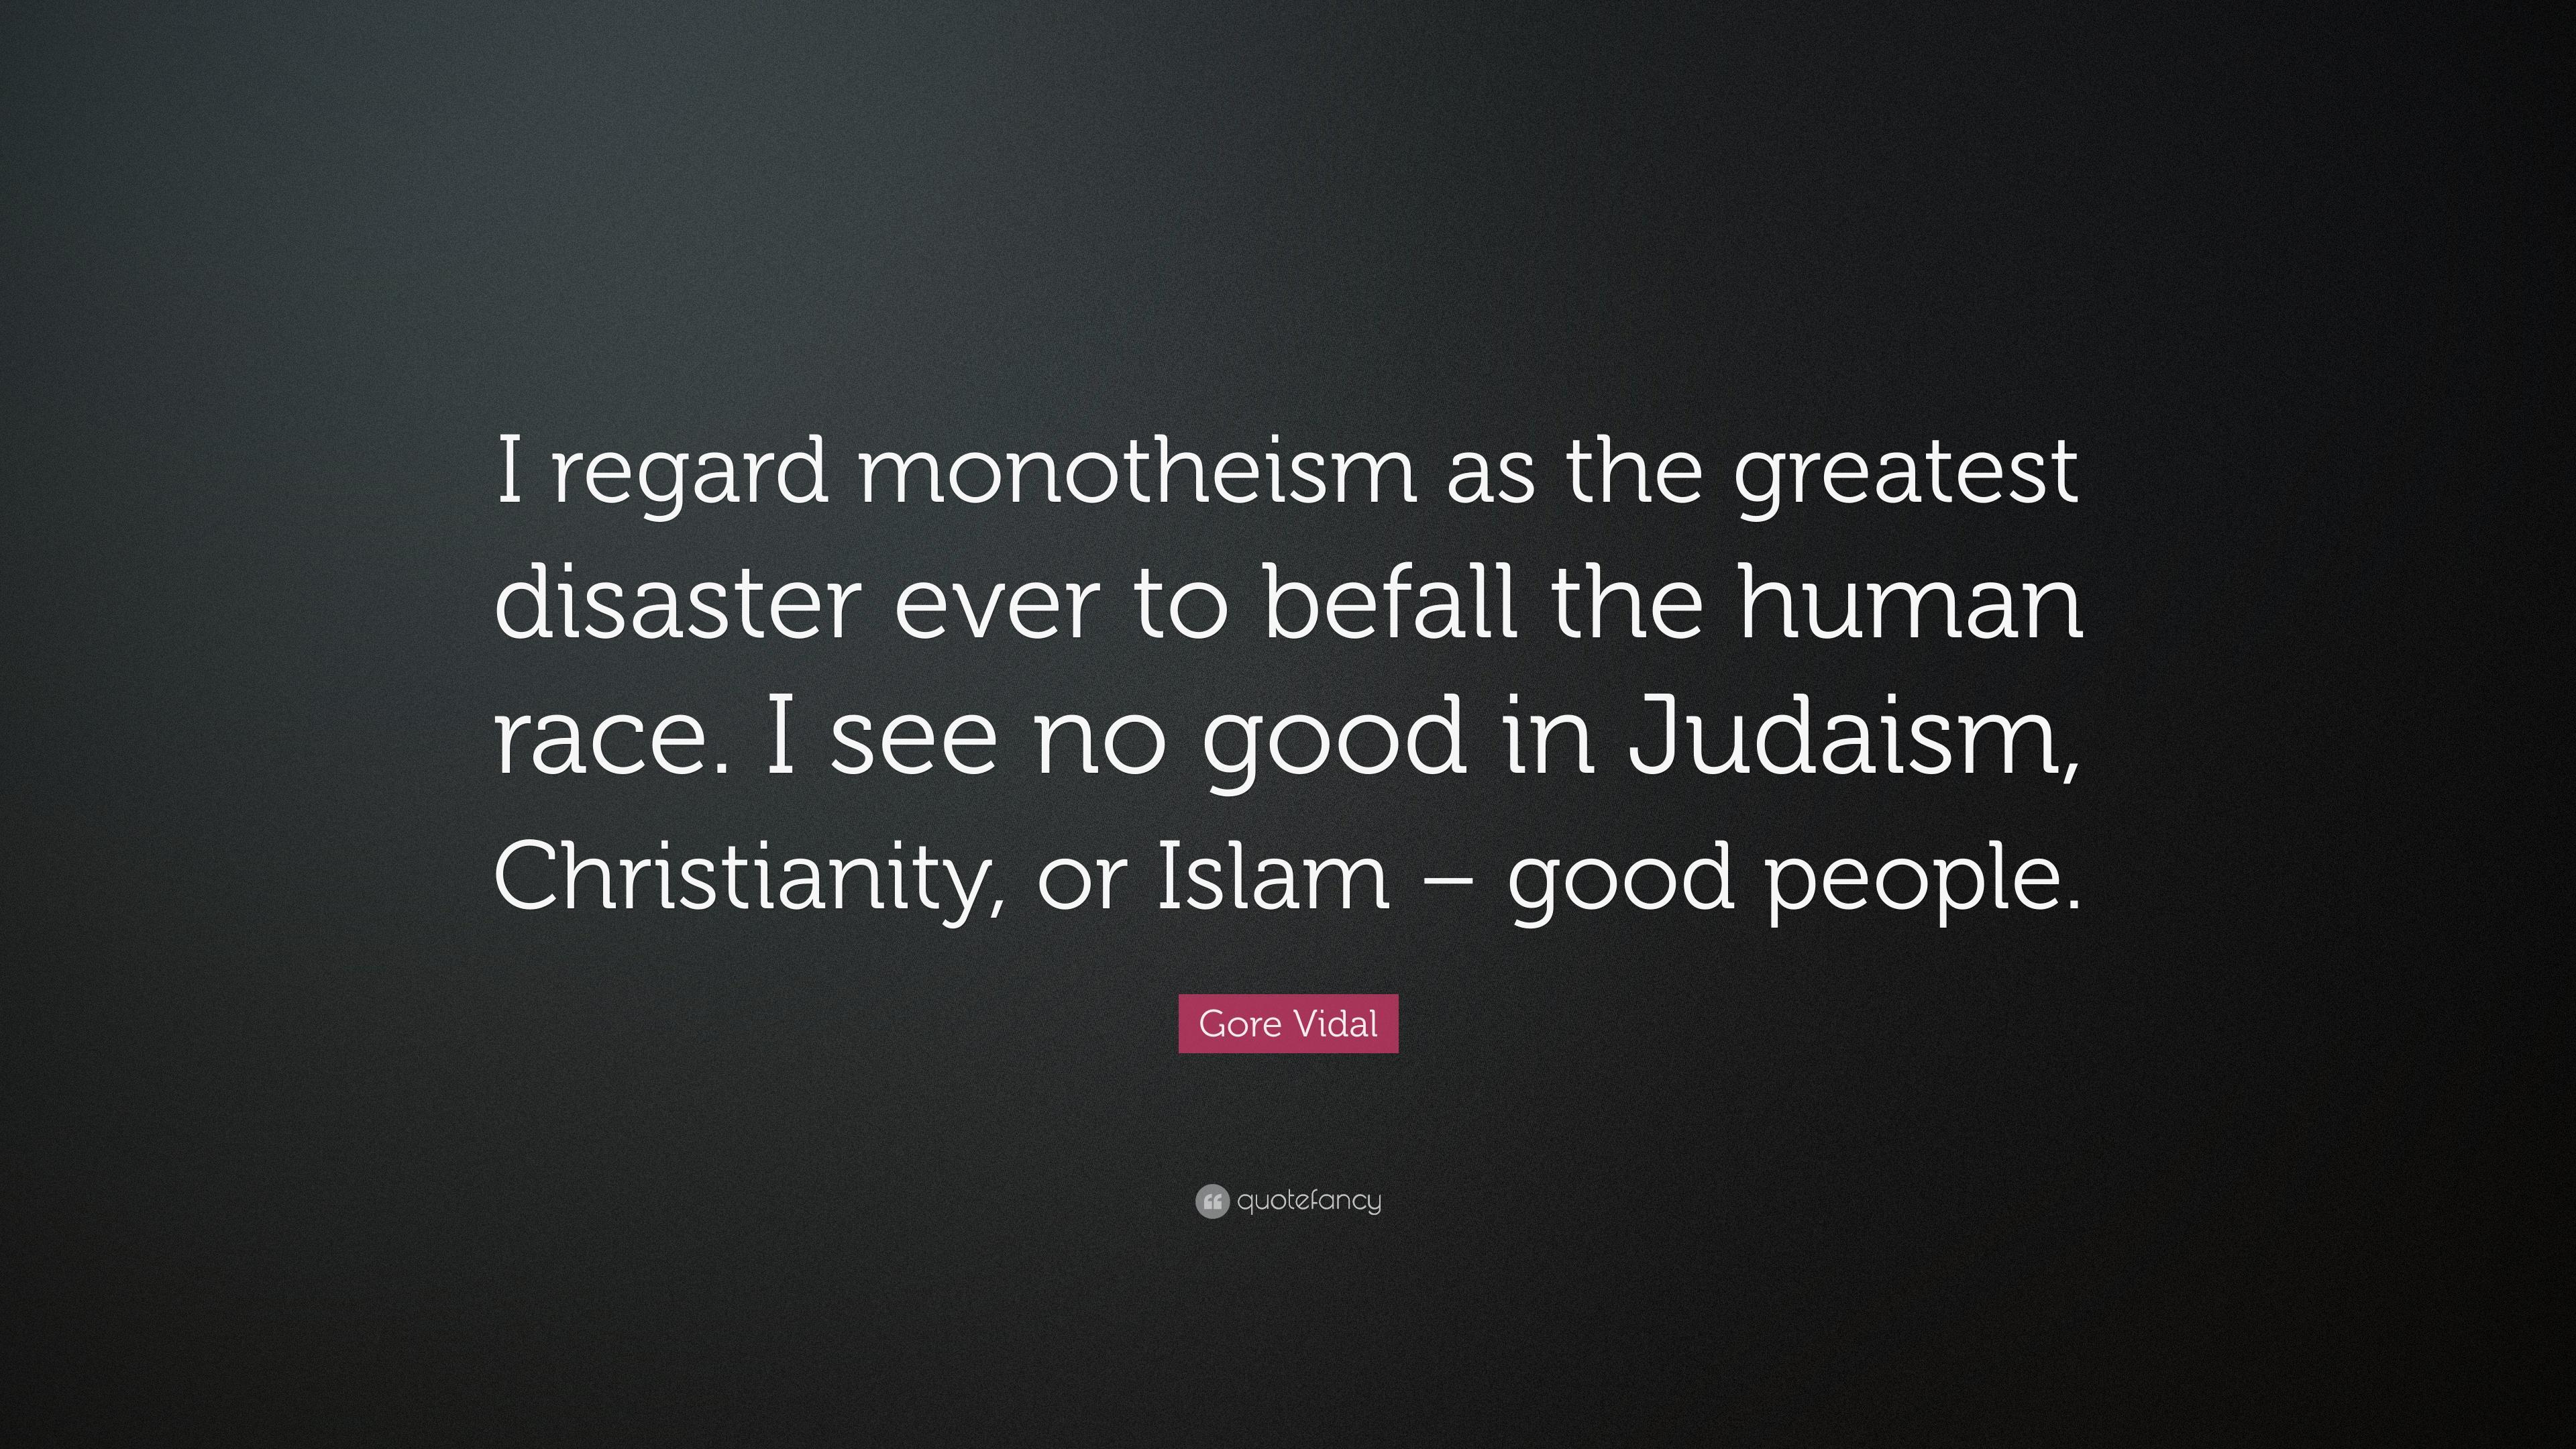 Gore Vidal Quote: “I regard monotheism as the greatest disaster ever